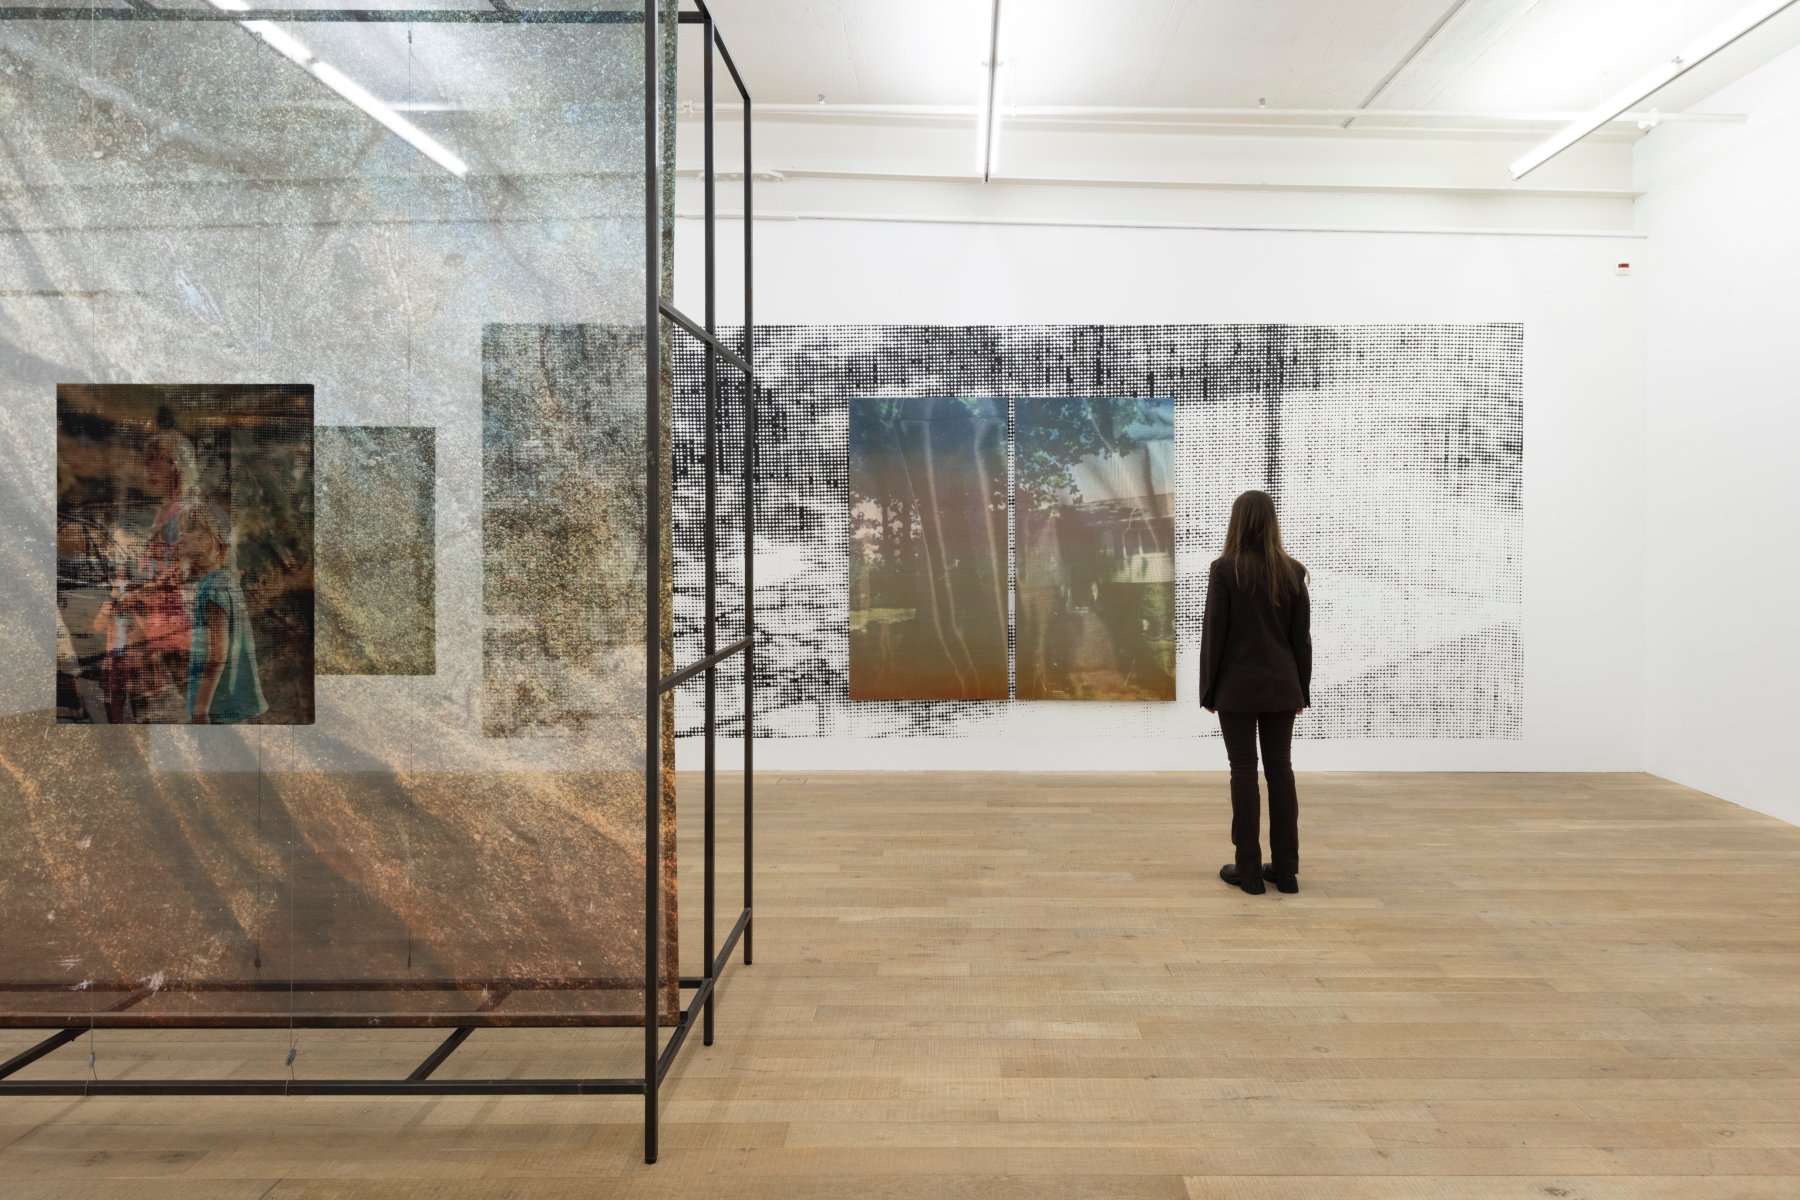 Image from our show of the day, Eva Nielsen: Limestone @ Galerie Peter Kilchmann, Zahnradstrasse